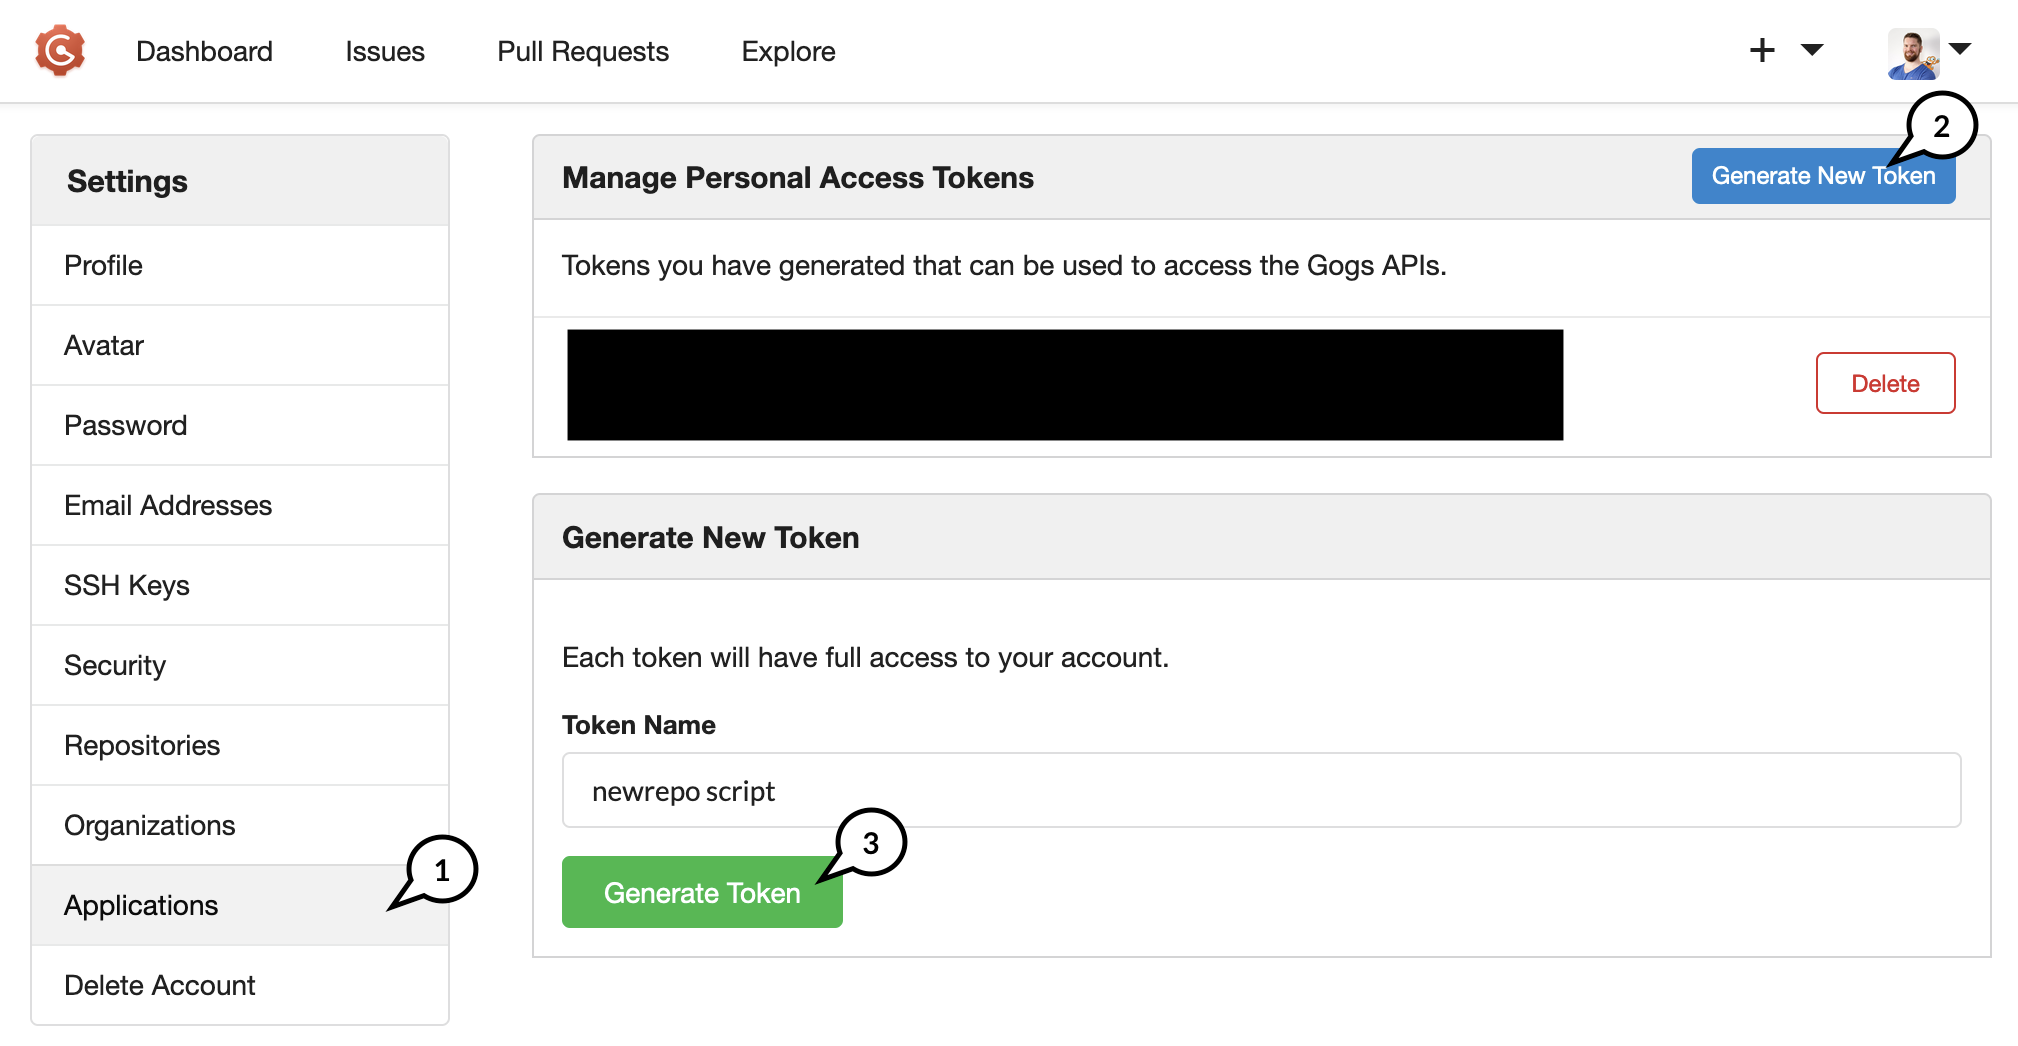 Screenshot of Gogs UI with Applications-Settings open. User is able to enter a Token Name and click on a “Generate New Token” button.